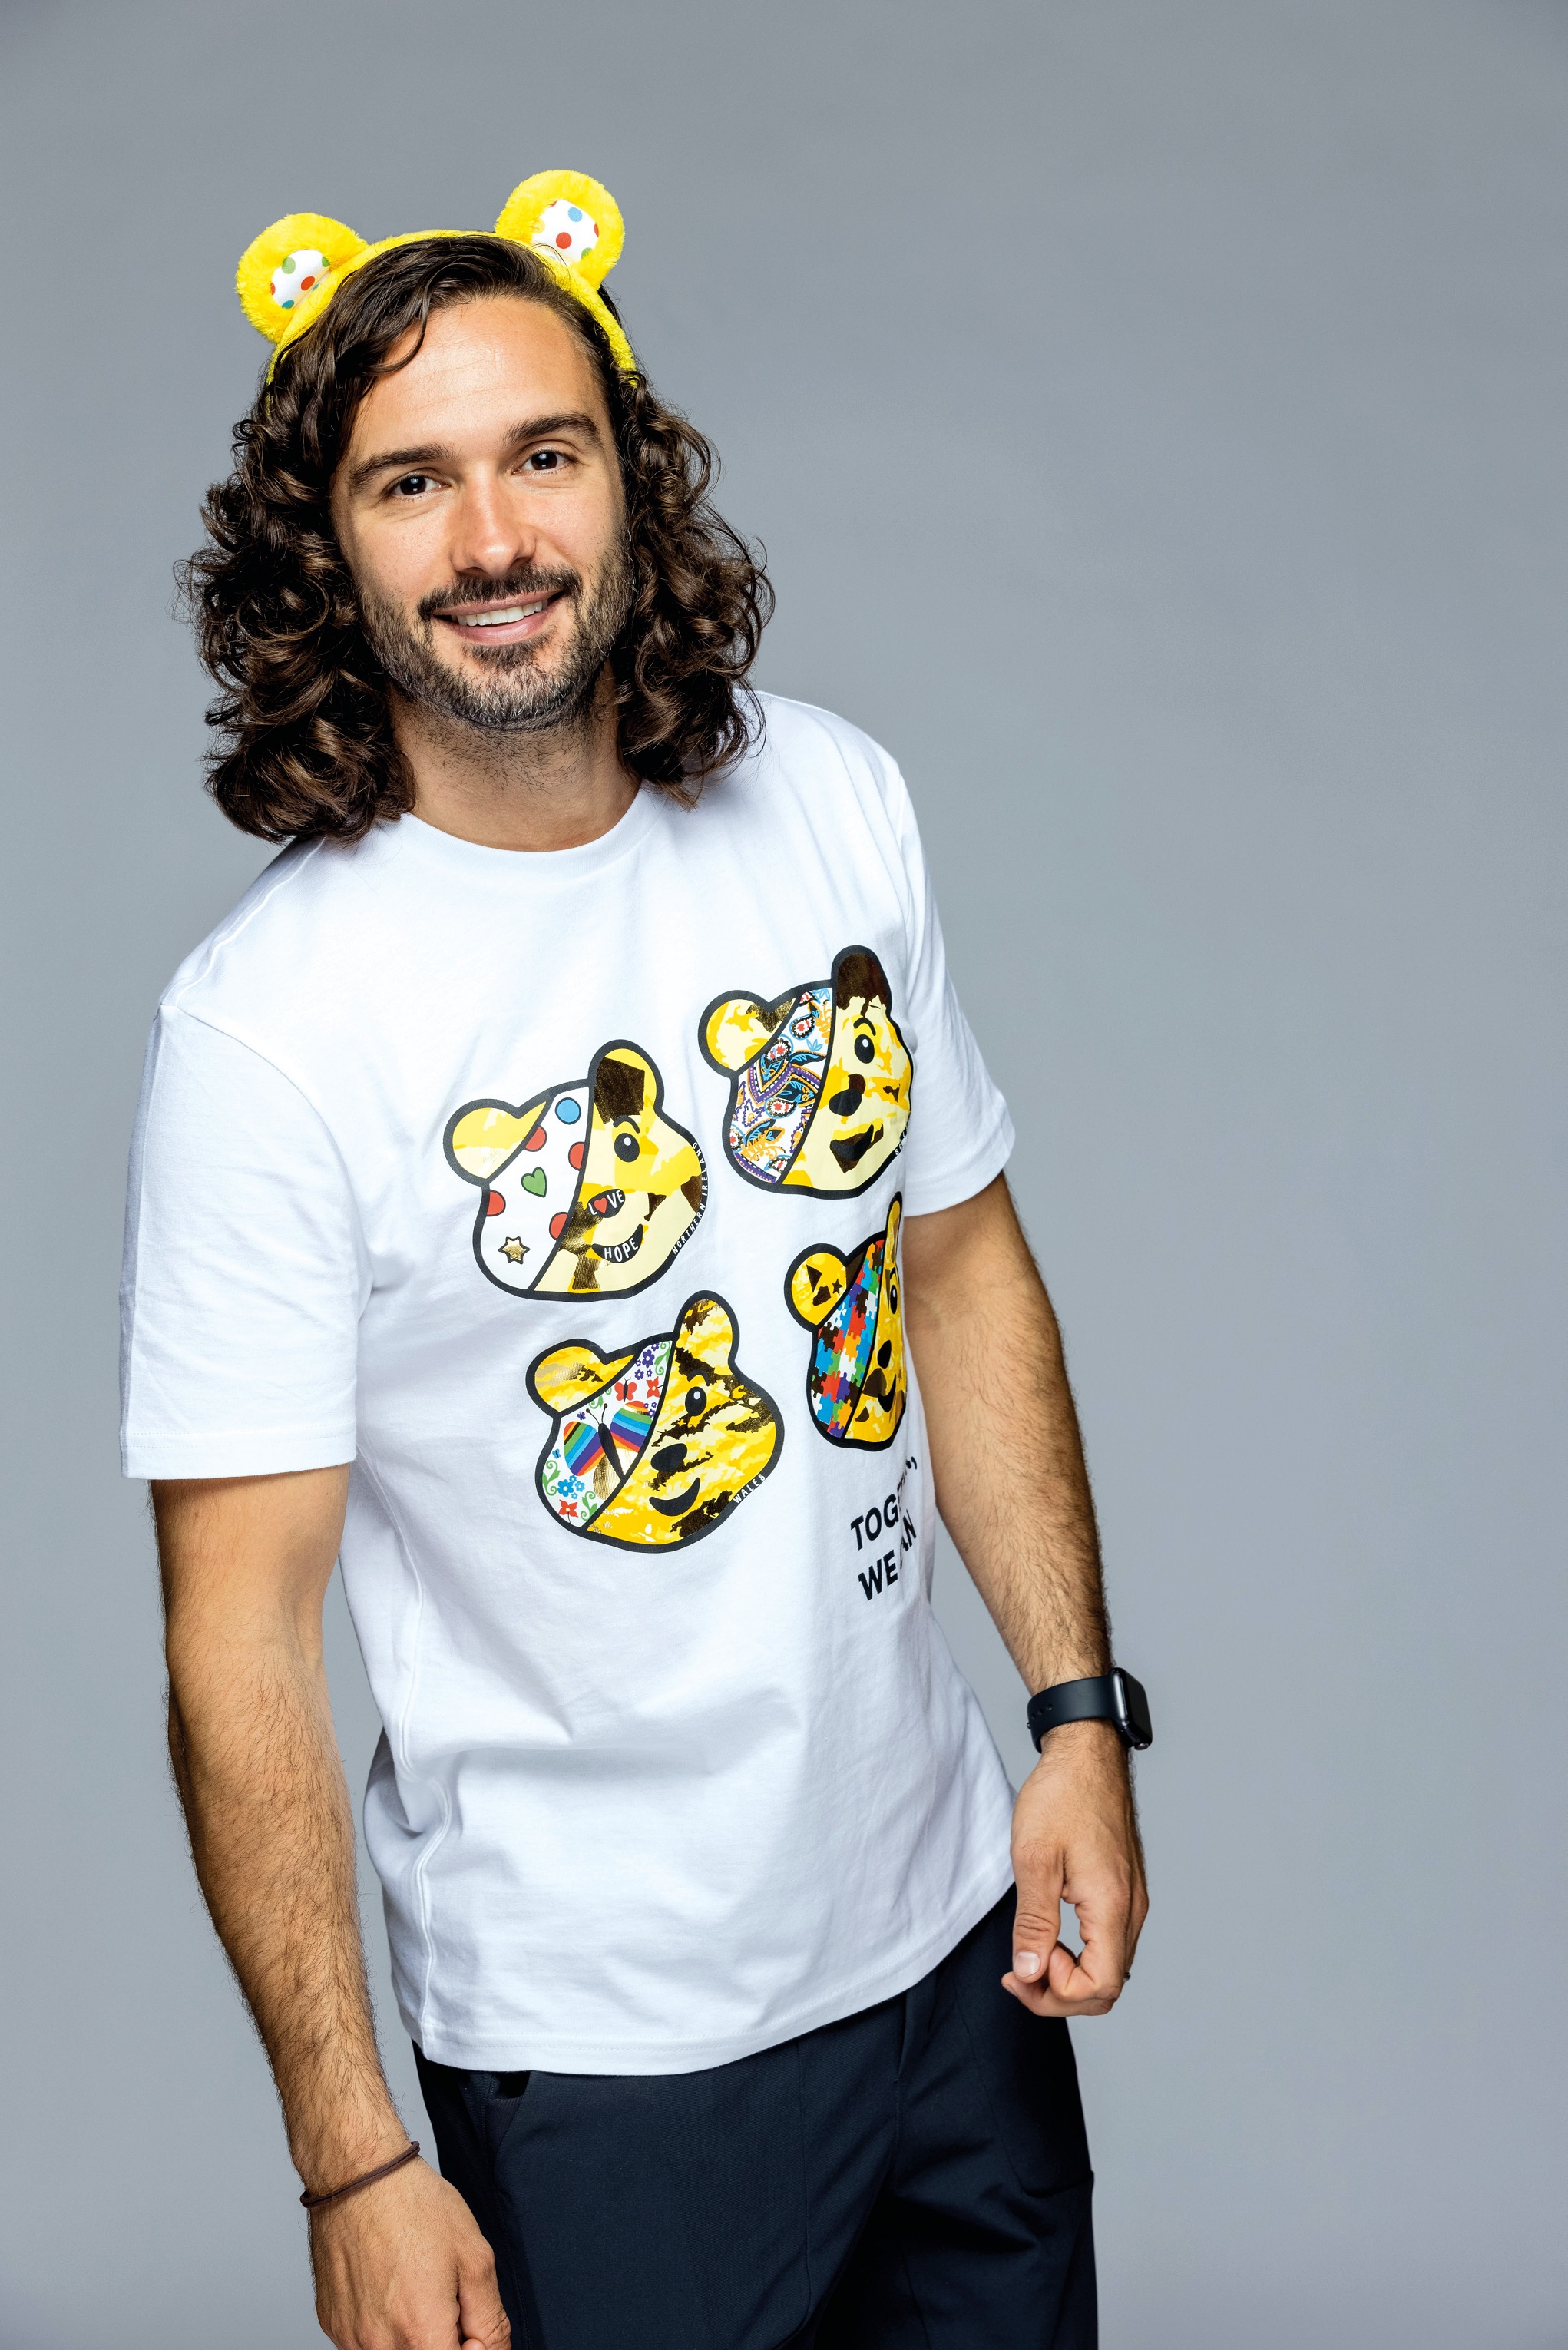 Joe Wicks MBE supports BBC Children in Need Together We Can campaign